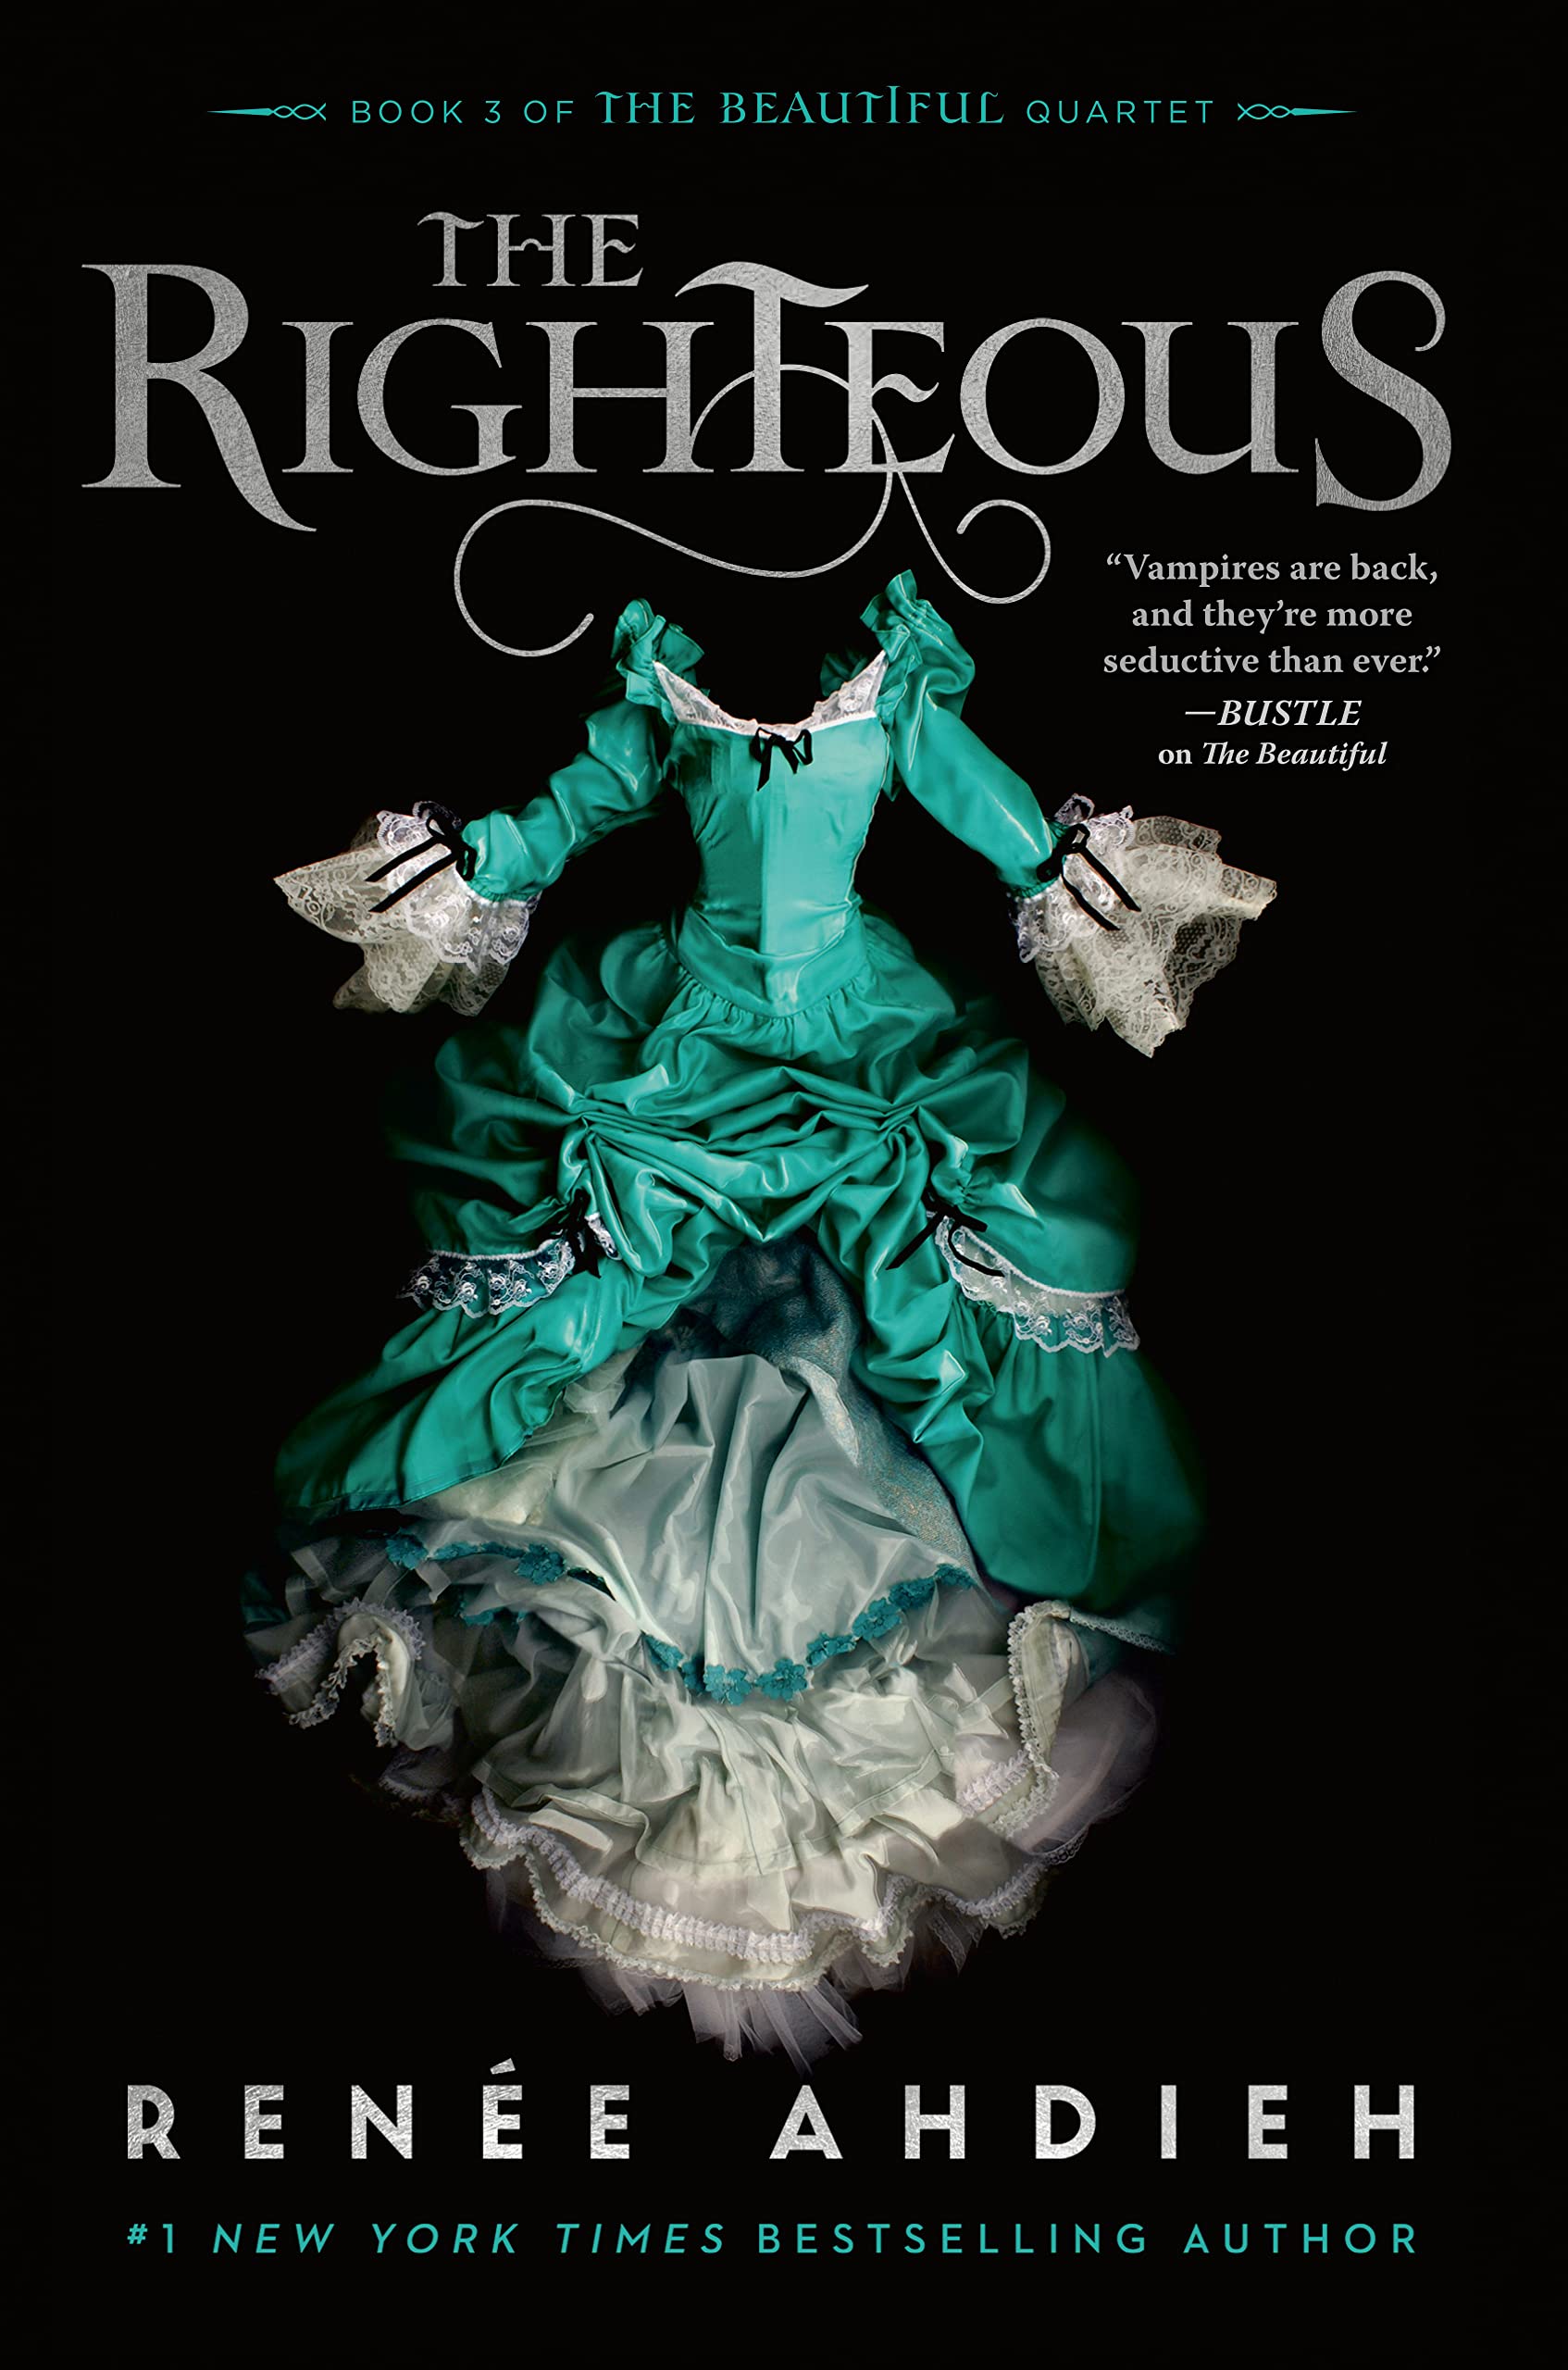 Cover of “The Righteous” by Renee Ahdieh